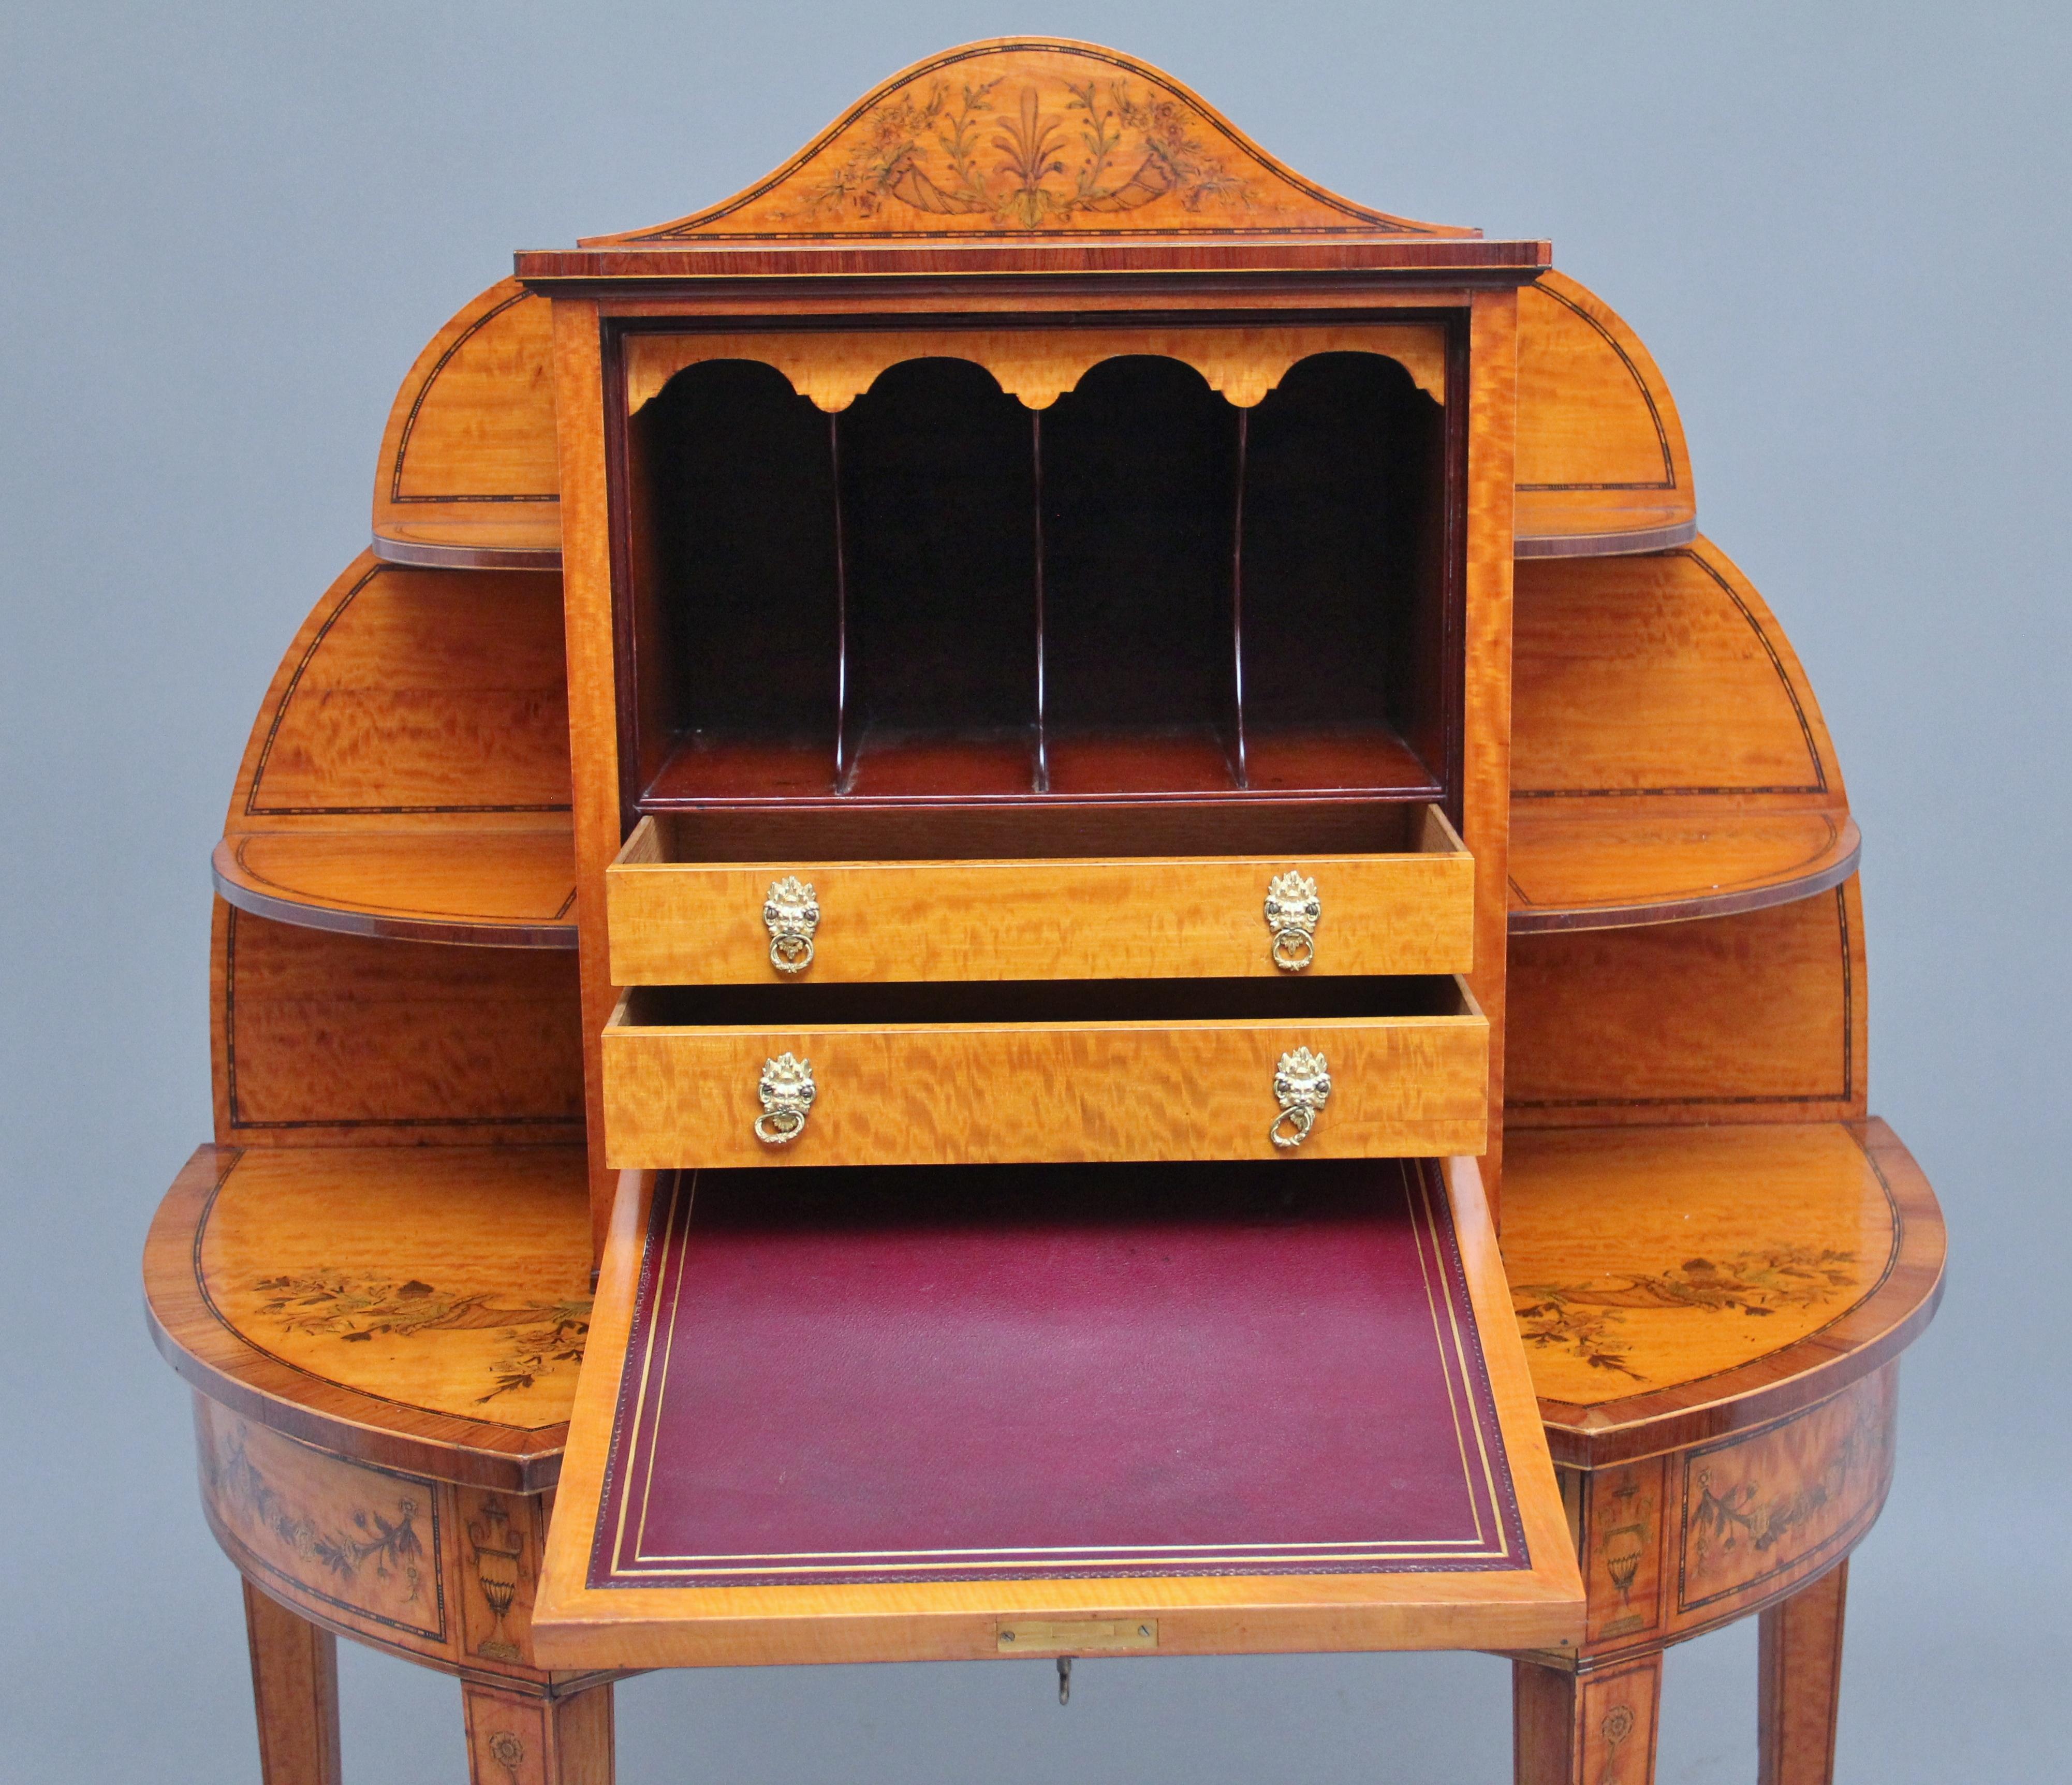 19th Century Sheraton Revival Satinwood Writing Desk In Good Condition For Sale In Martlesham, GB